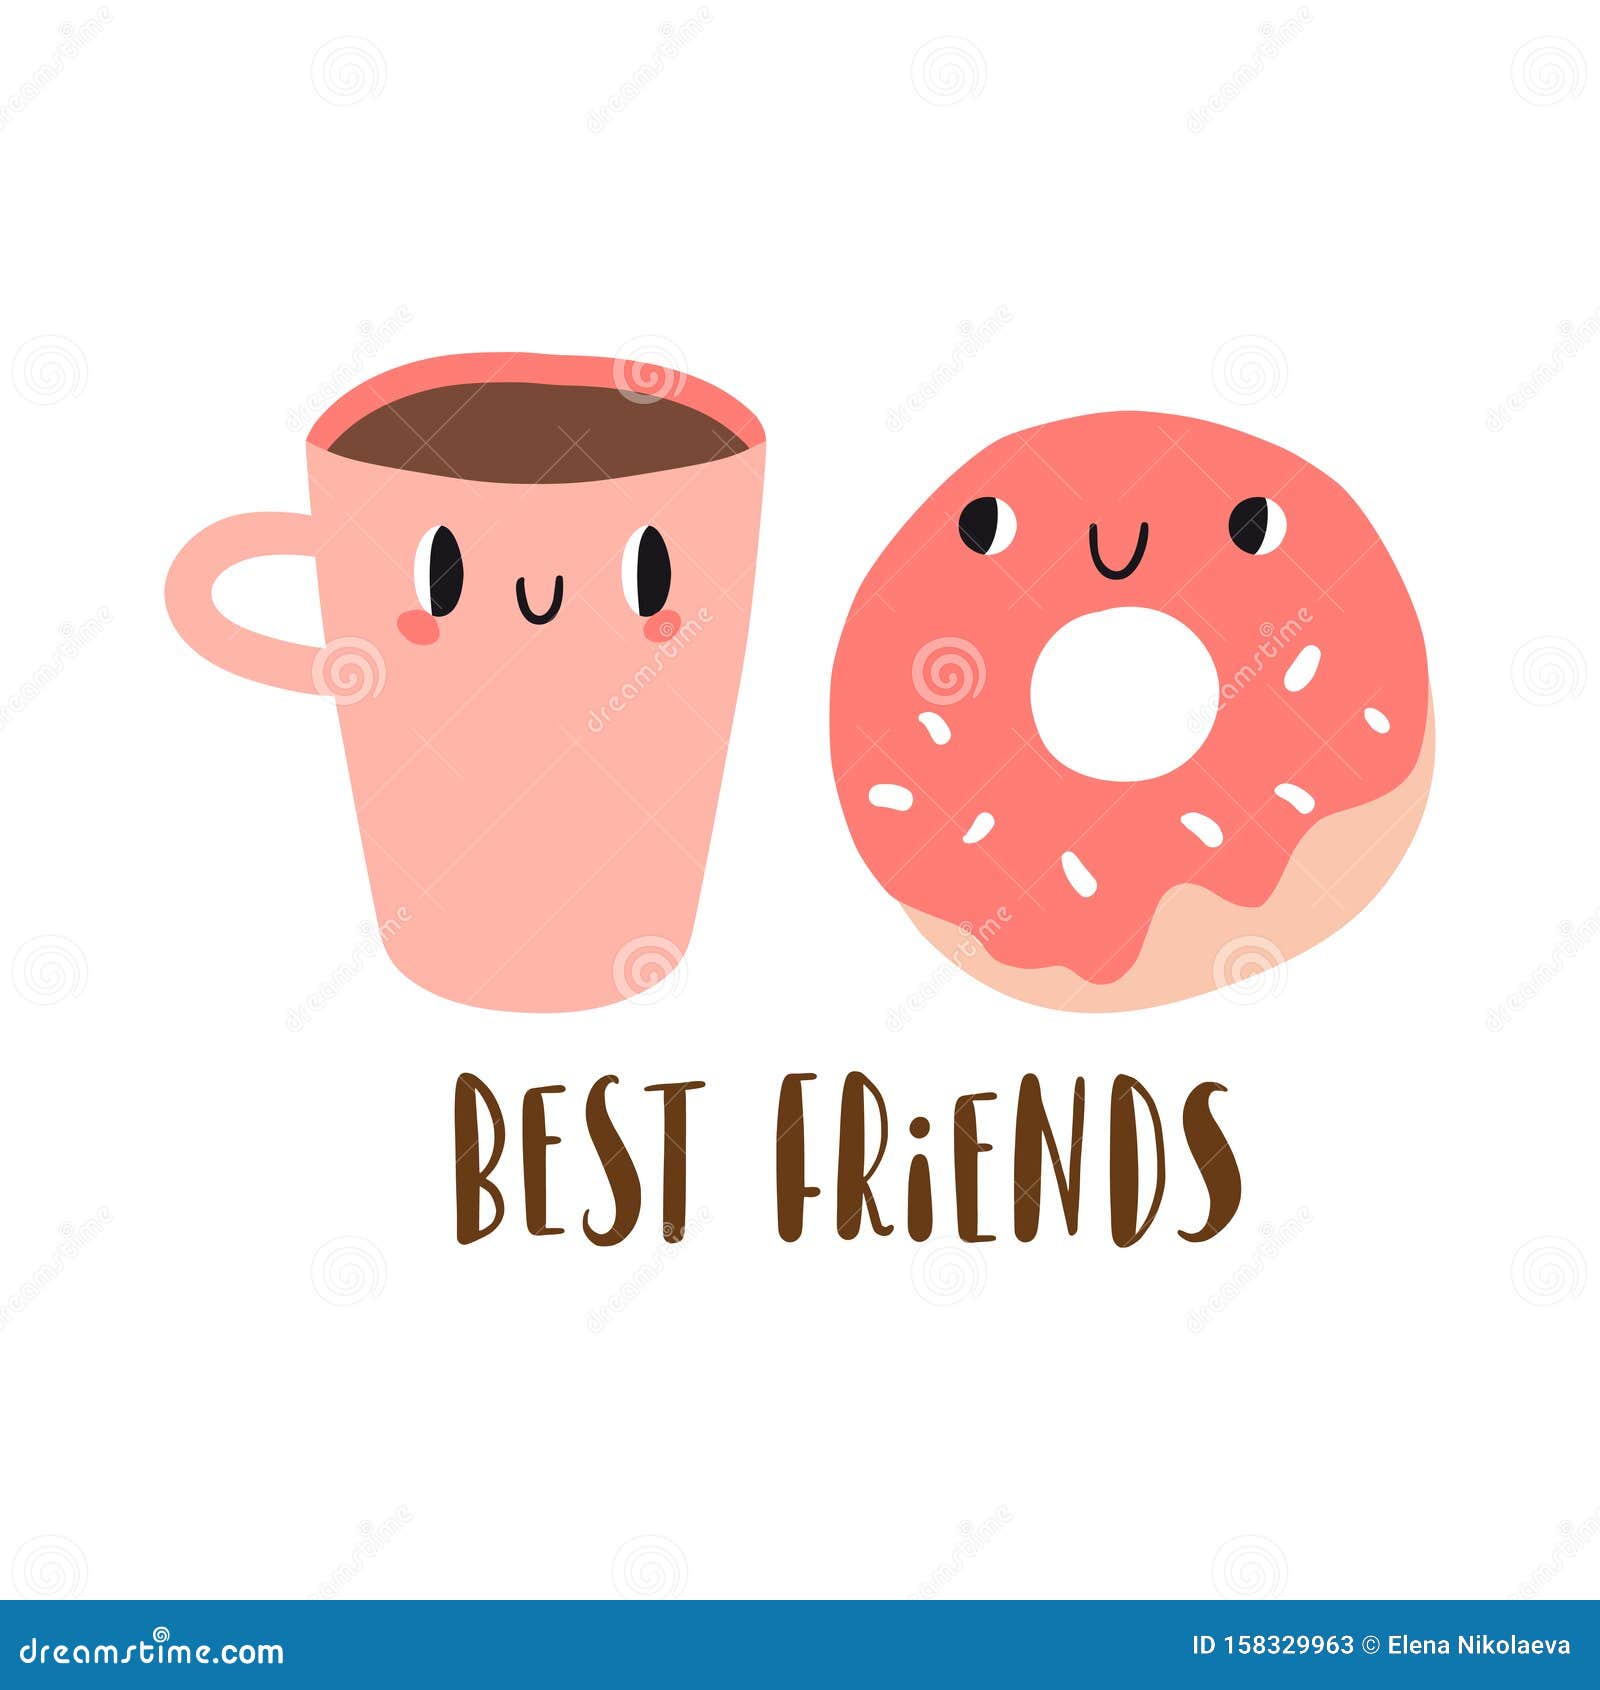 Best Friends: Cartoon Donut and Cup of Coffee Stock Vector - Illustration  of icon, face: 158329963